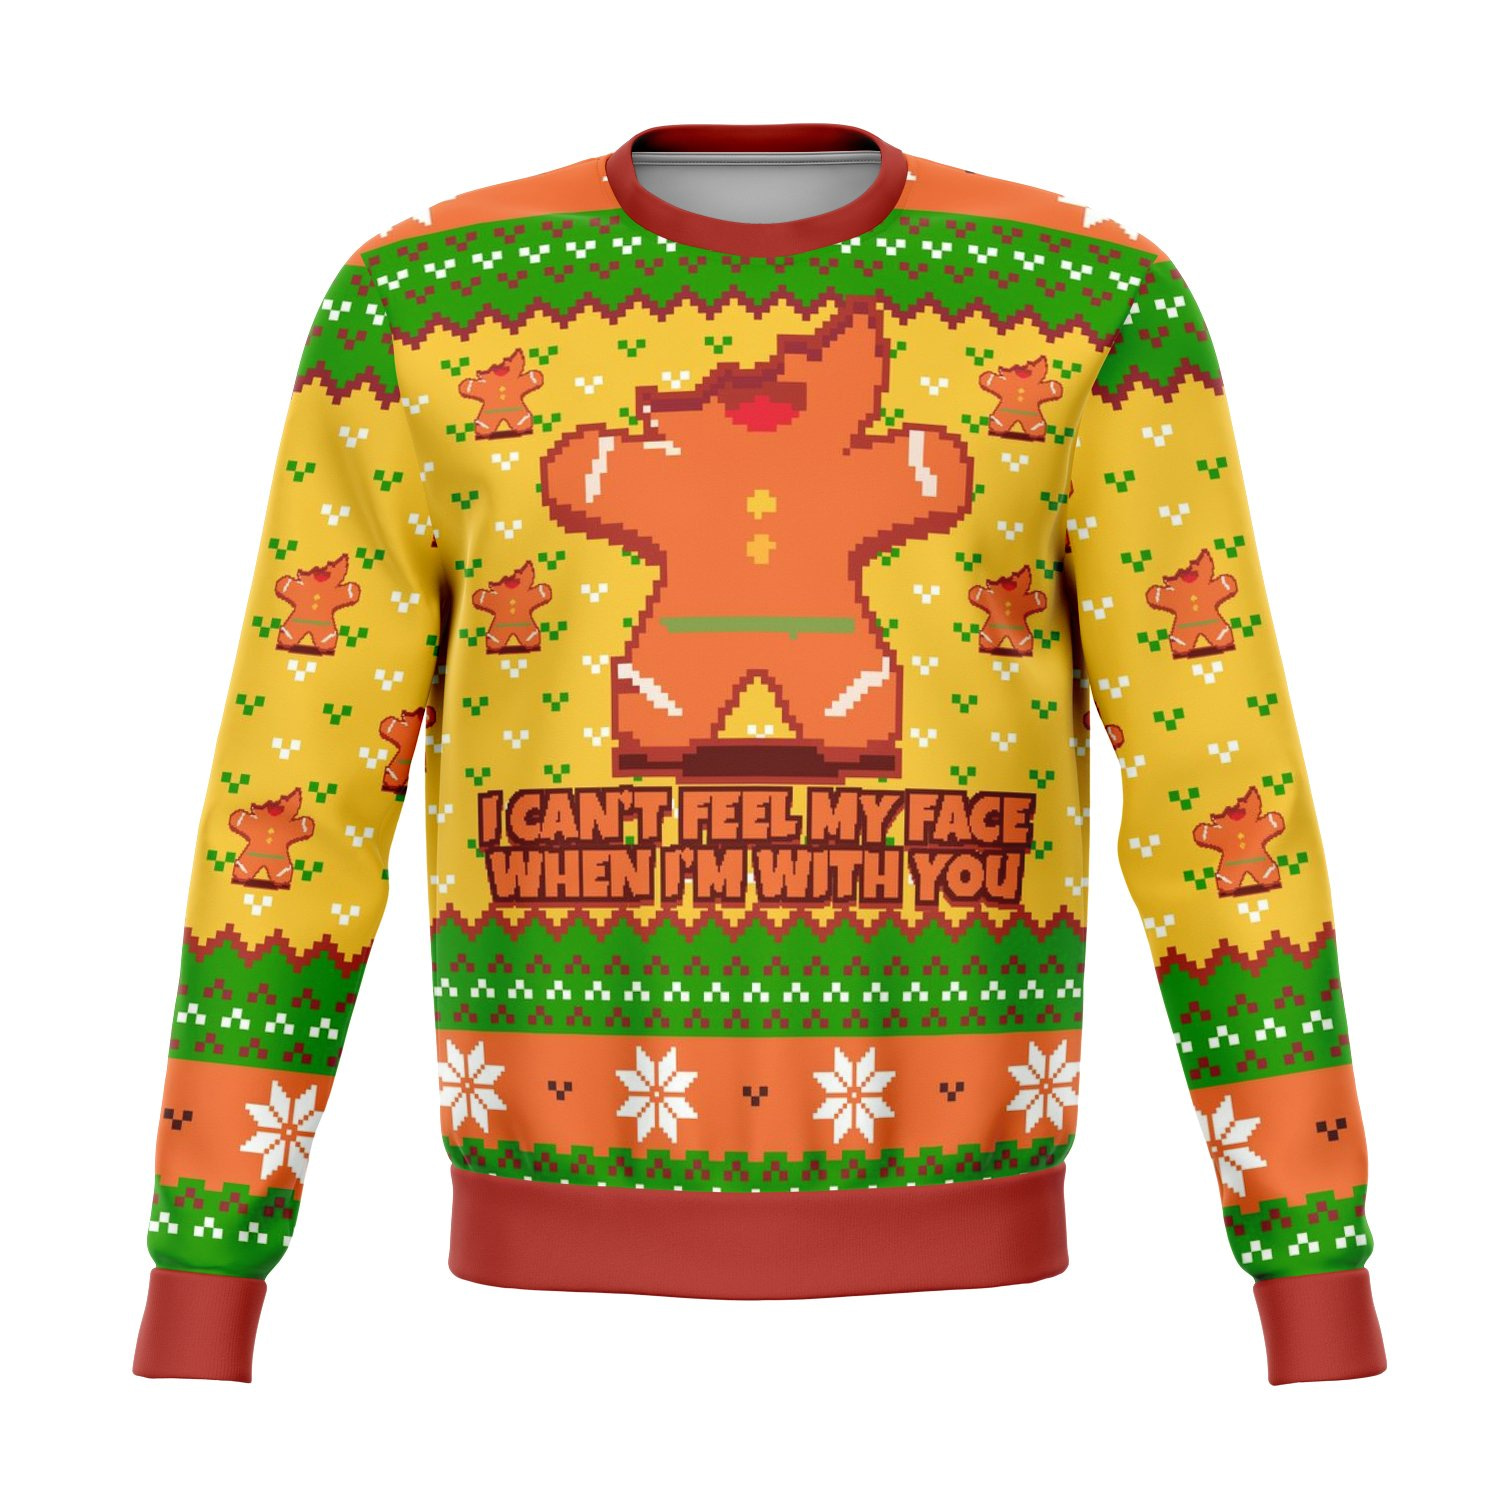 I Cant Feel My Face When I'M With You Funny Ugly Sweater